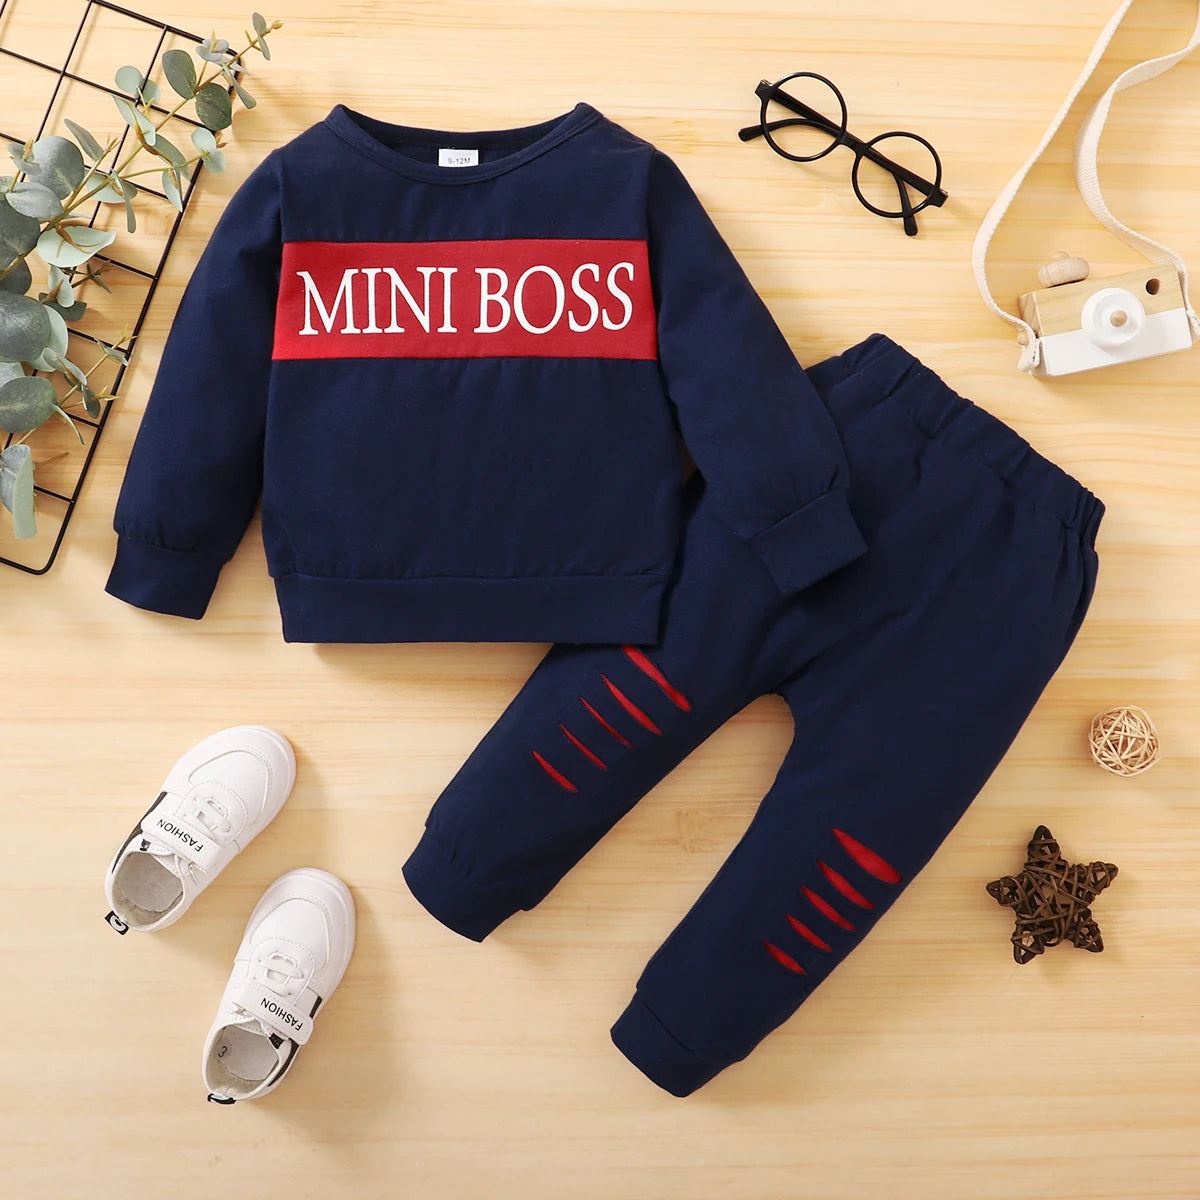 New Baby Boy Outfit Suit Letter Printing Long Sleeve Top + Pants 2PCs Fashion Infant Baby Boy Clothes Spring Baby Boy Sports Clothes